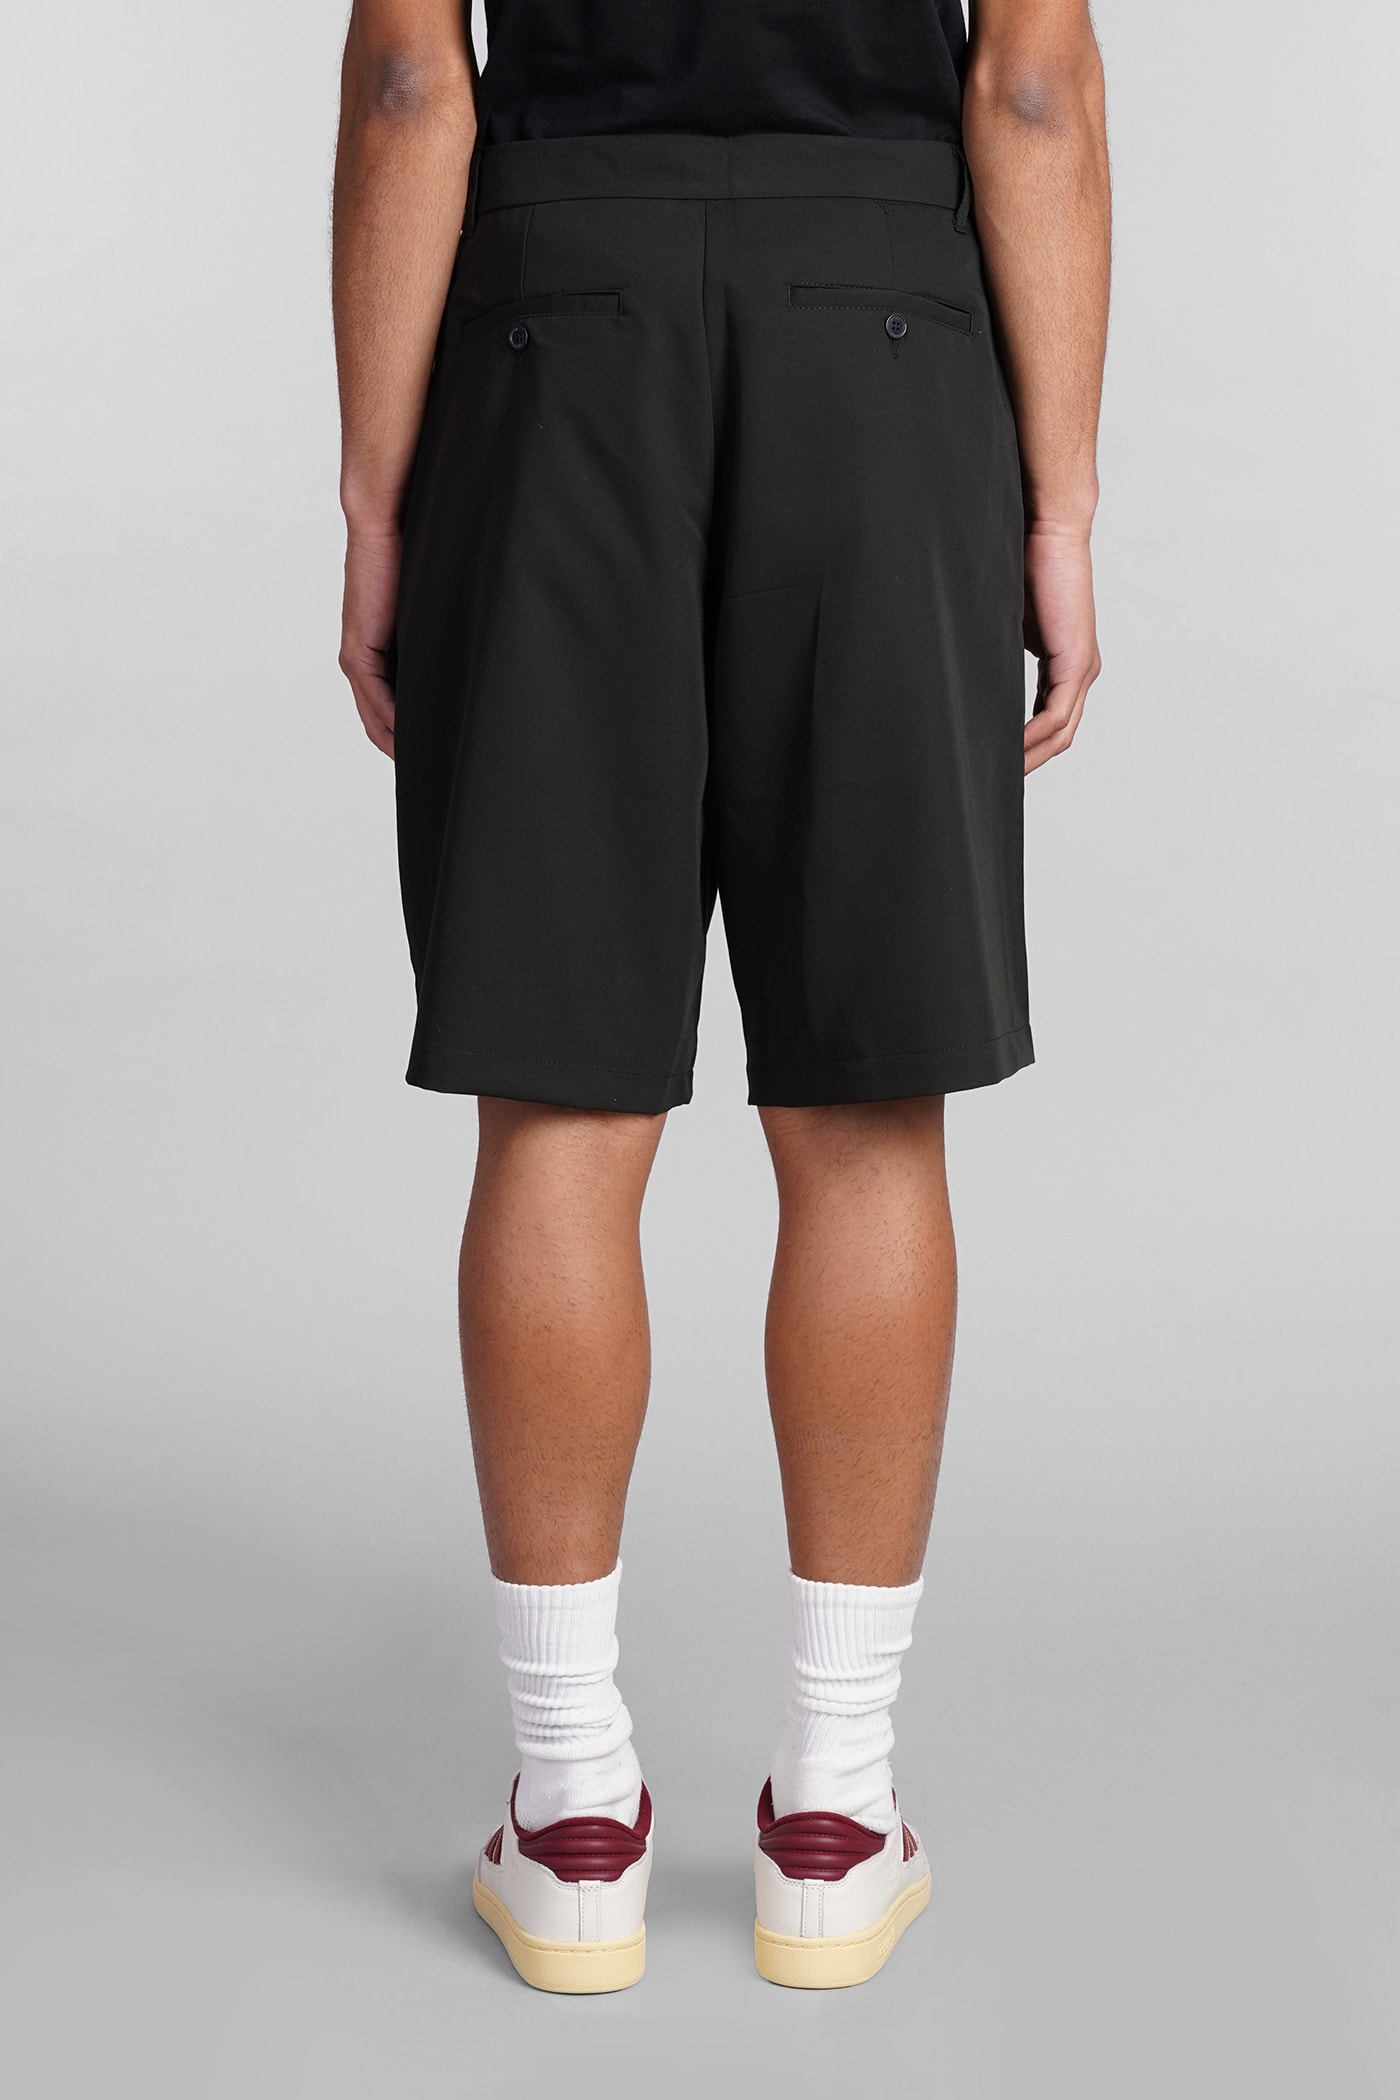 Shop Family First Milano Shorts In Black Polyester